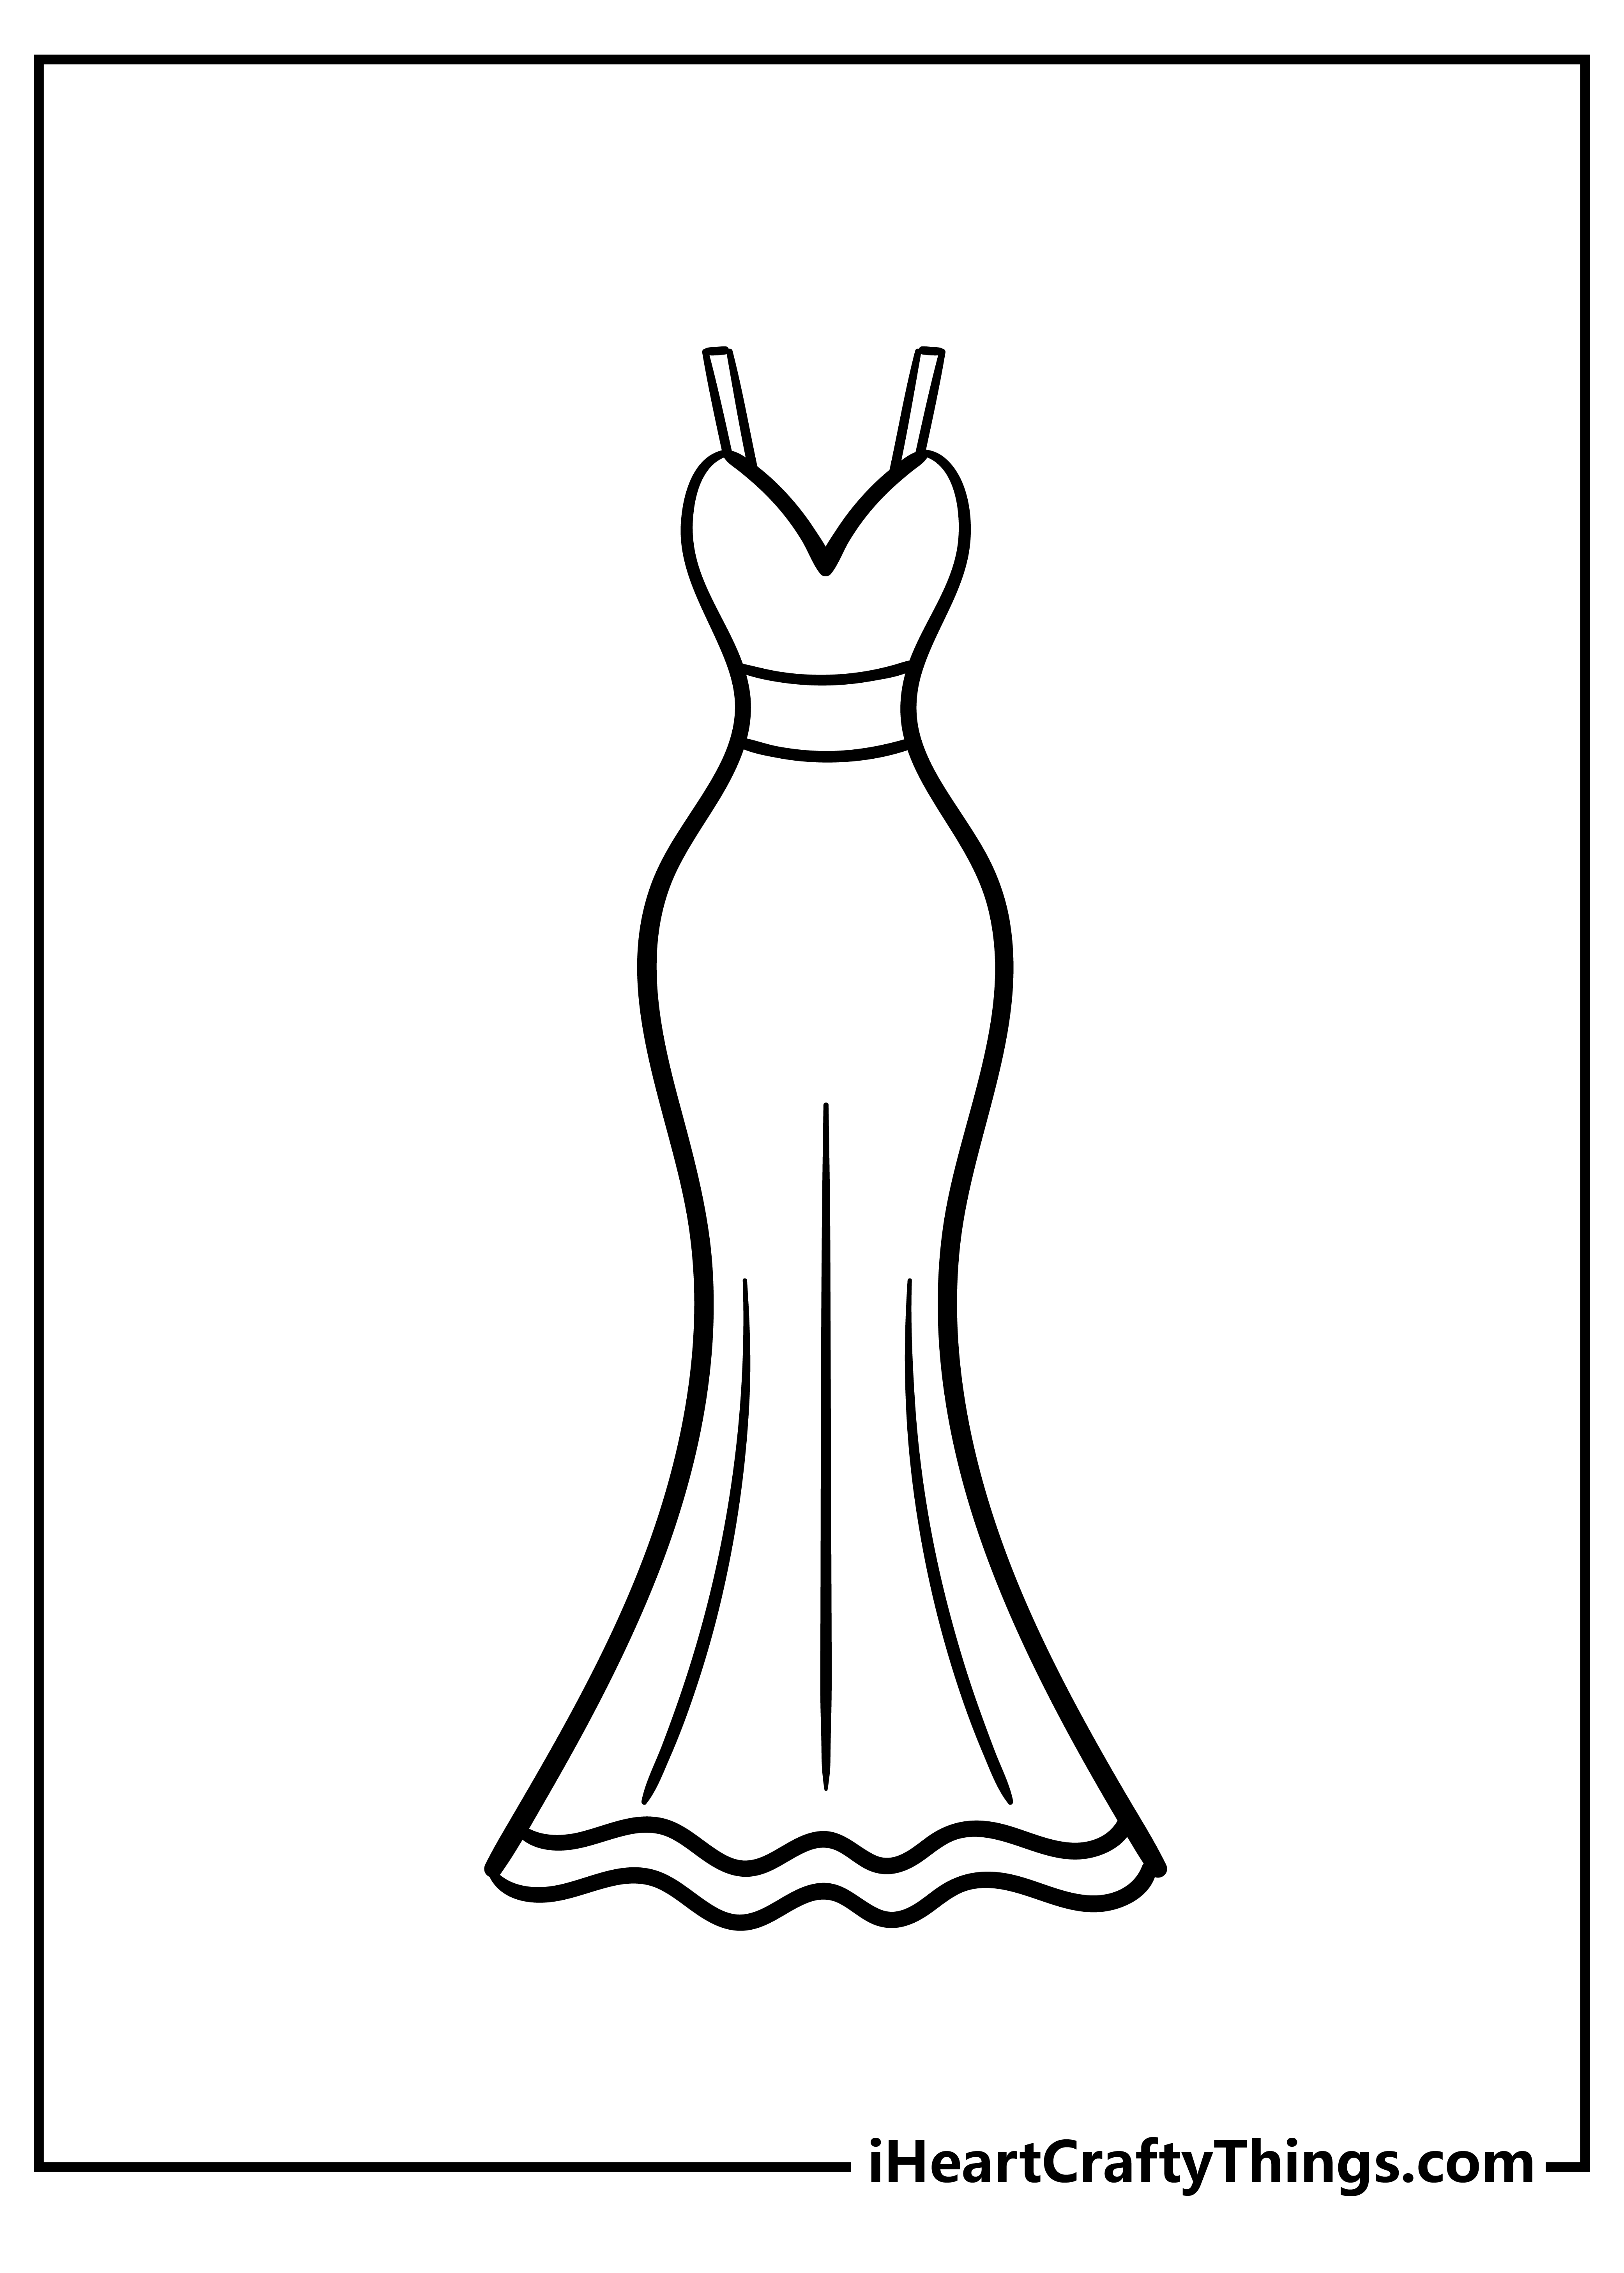 Michael Faircloth Evening Dress Coloring Page] - UNT Digital Library